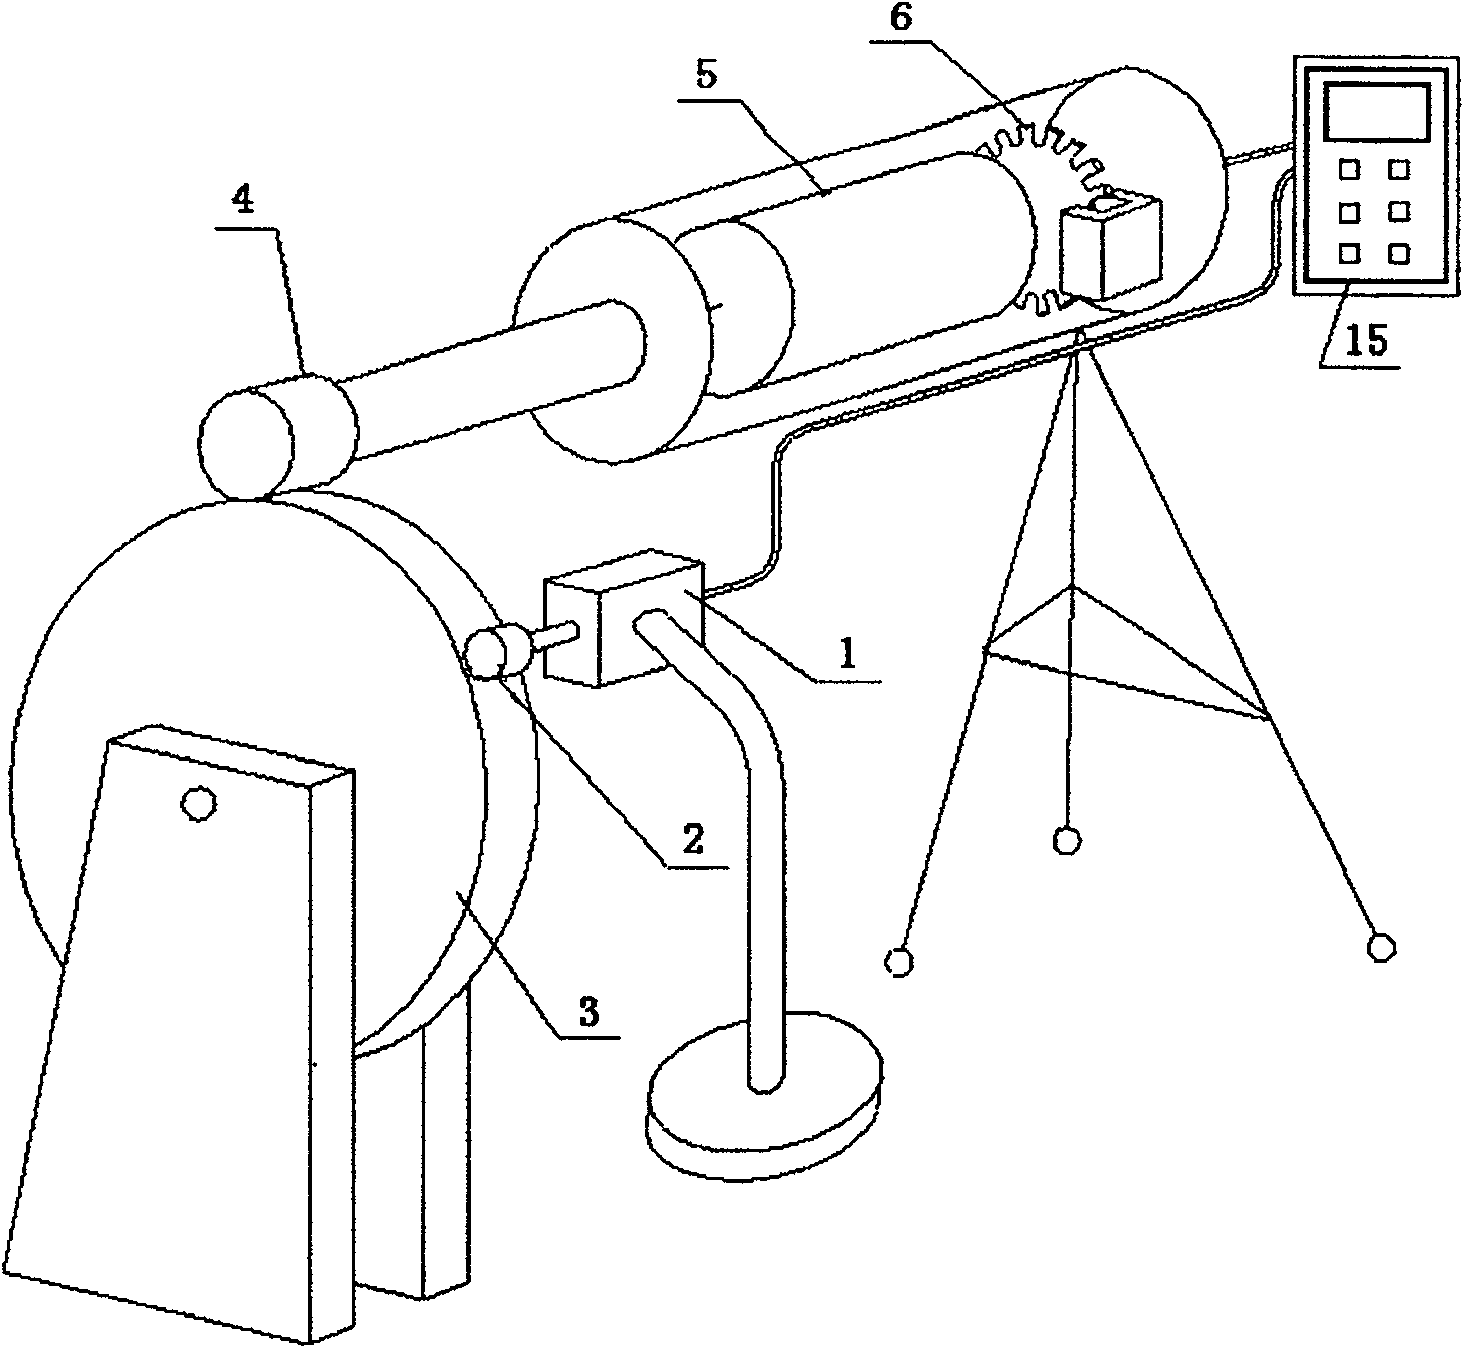 Test method for portable elevator speed limiter testing device